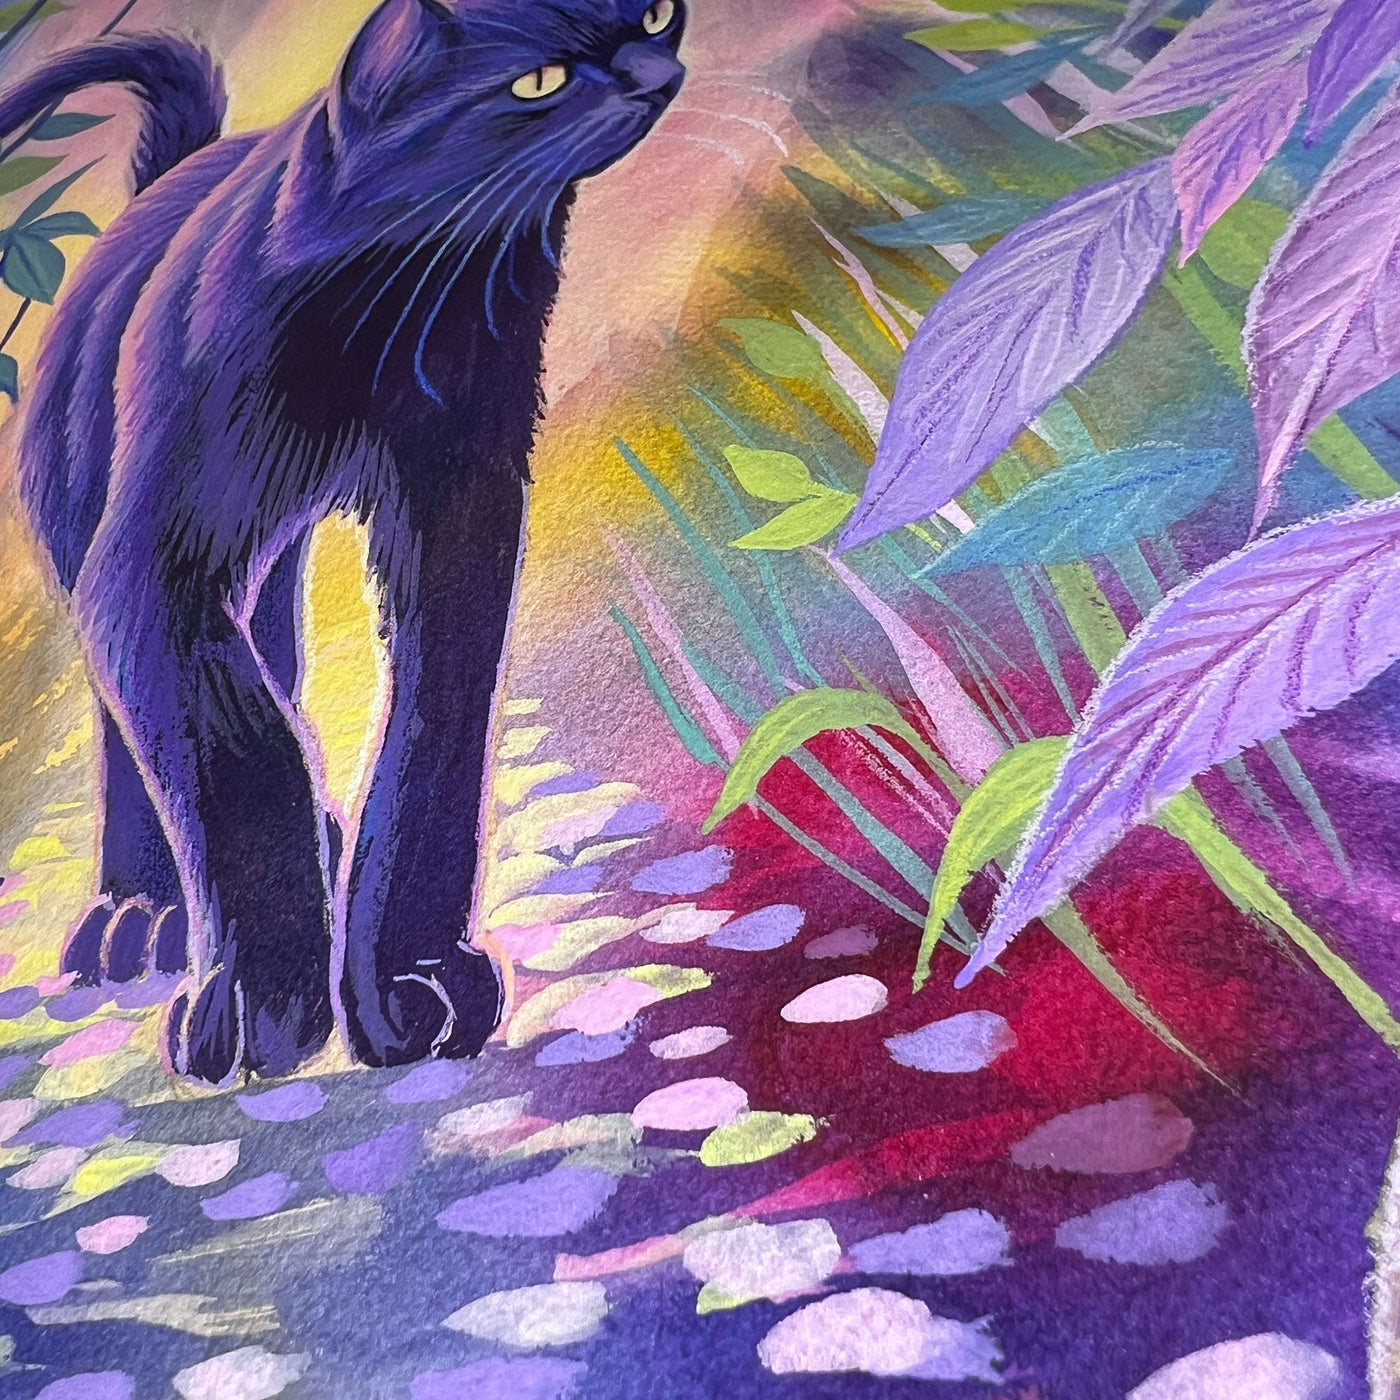 A painting depicting The Cat (Twilight Watch) in a colorful, mystical forest with vibrant purple and green foliage.